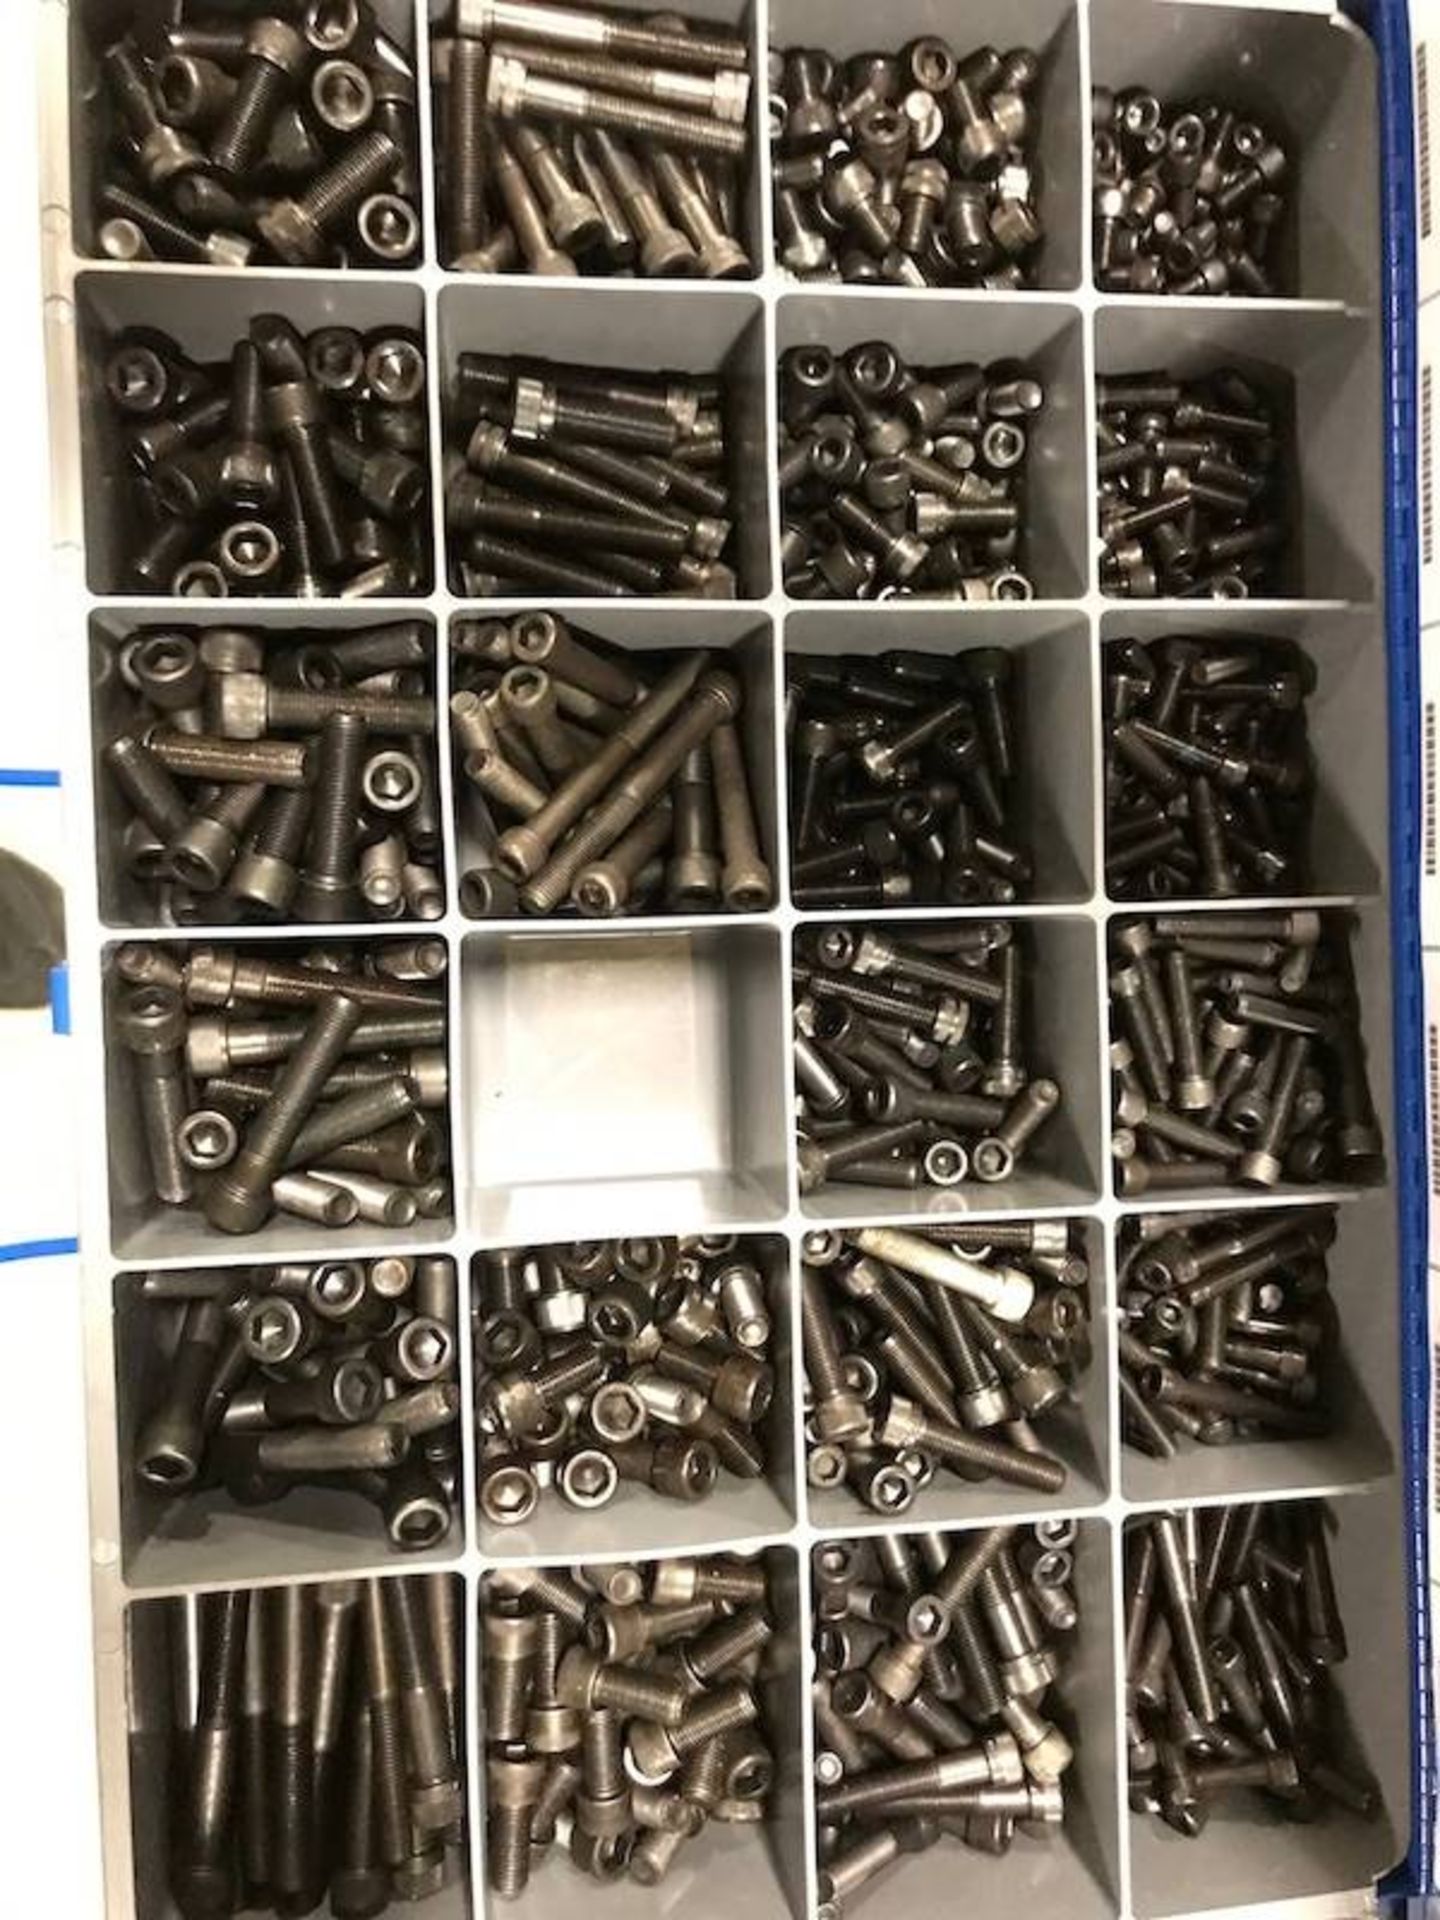 Contents of Fastenal Parts Bins - Image 13 of 70